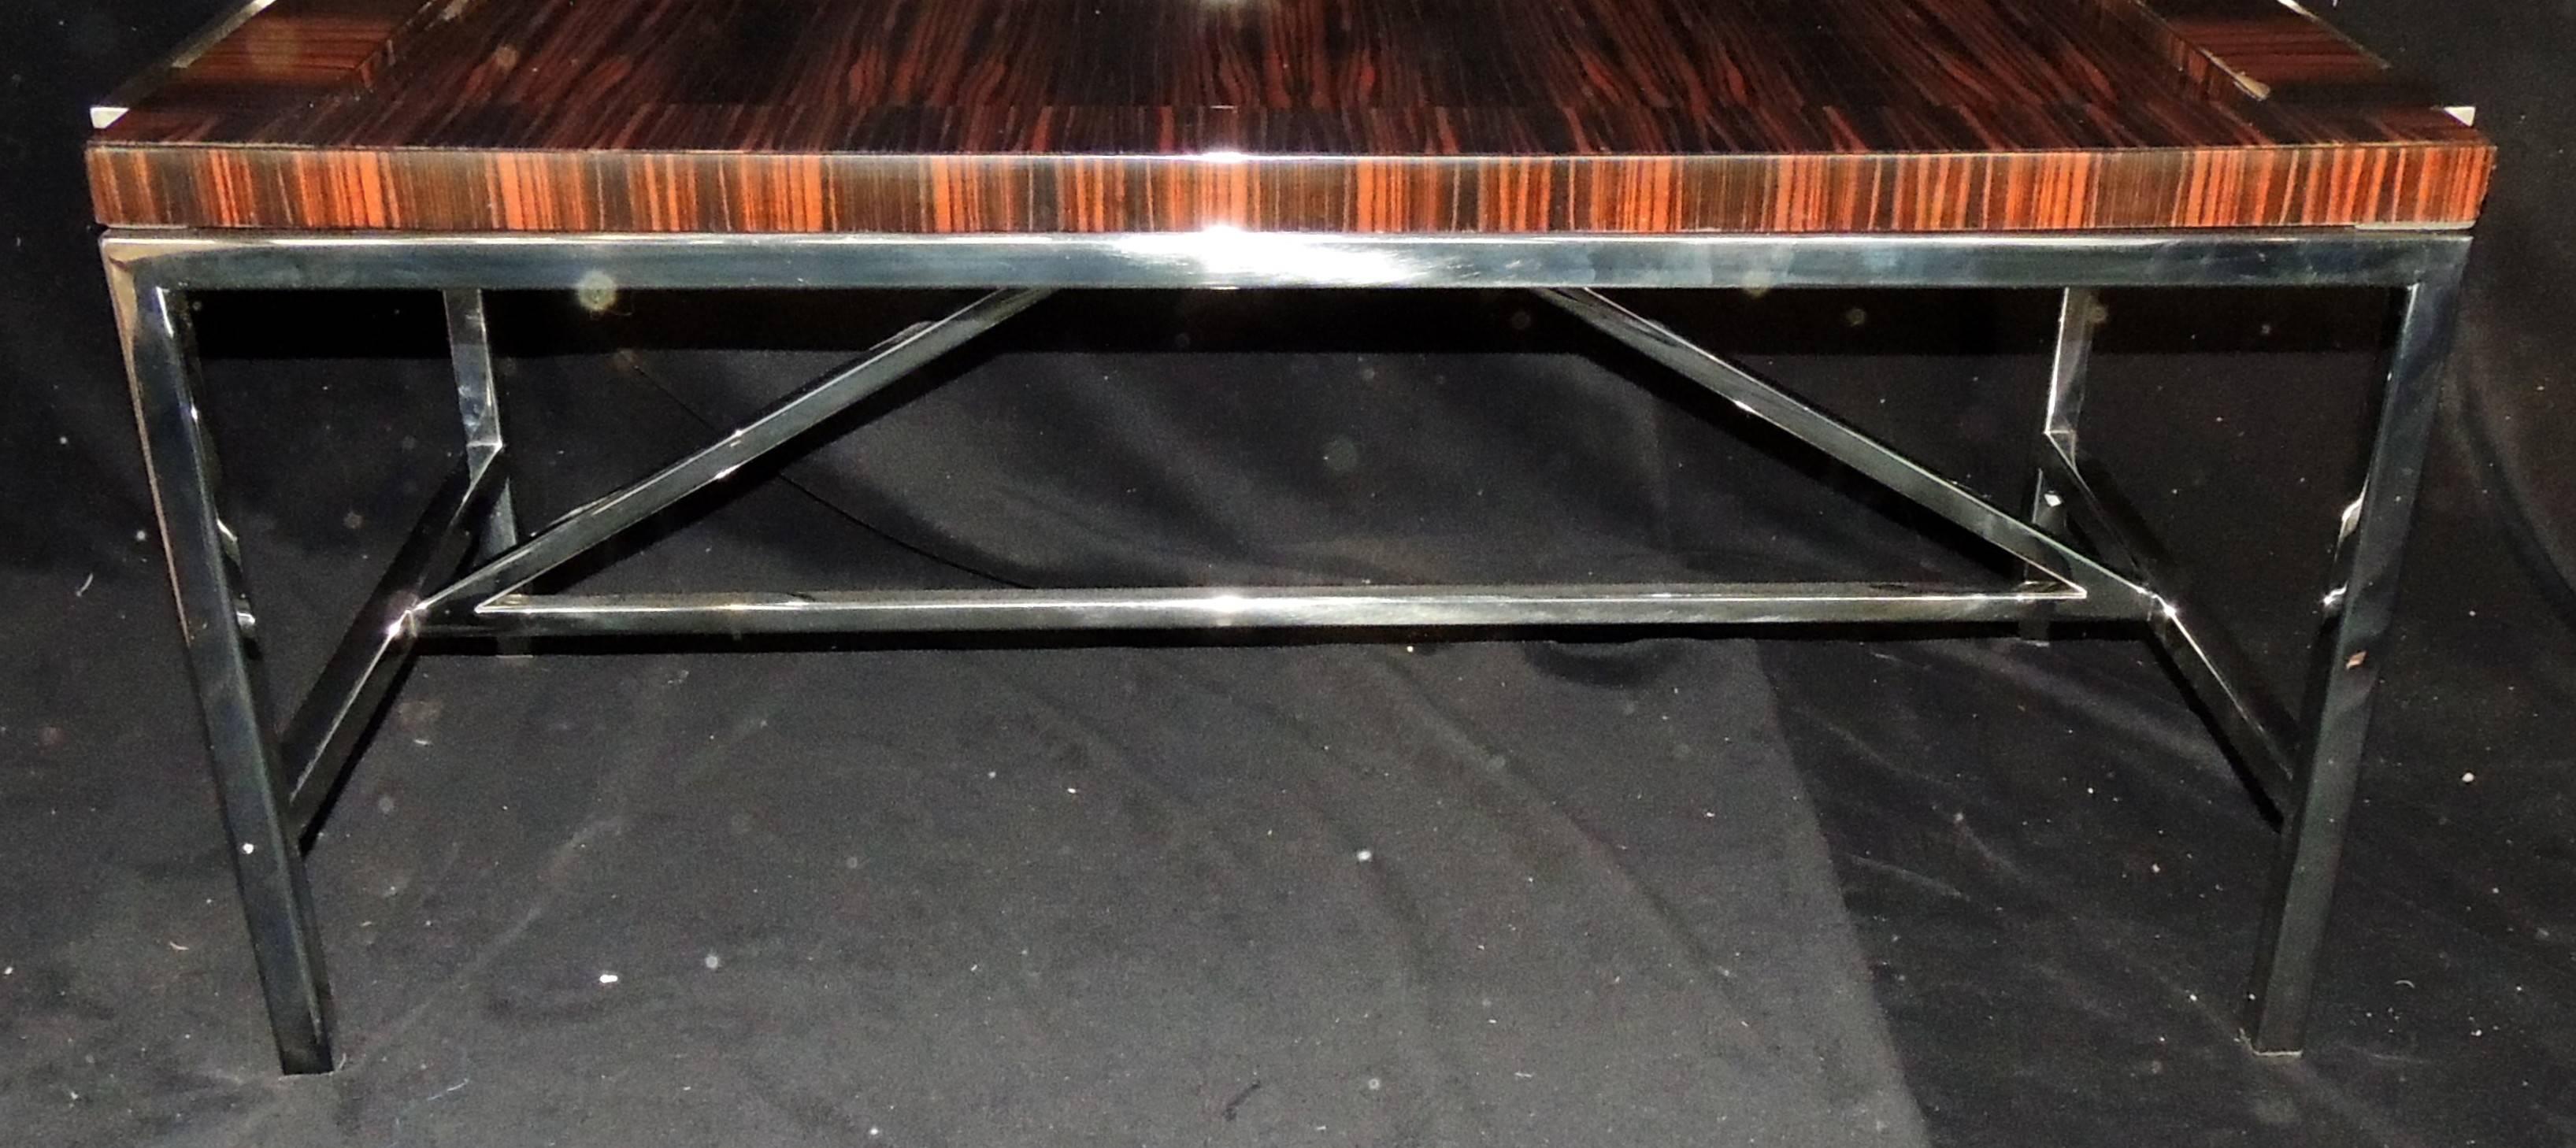 Wonderful Midcentury Macassar Ebony Polished Nickel Deco Tray Top Coffee Table In Good Condition For Sale In Roslyn, NY